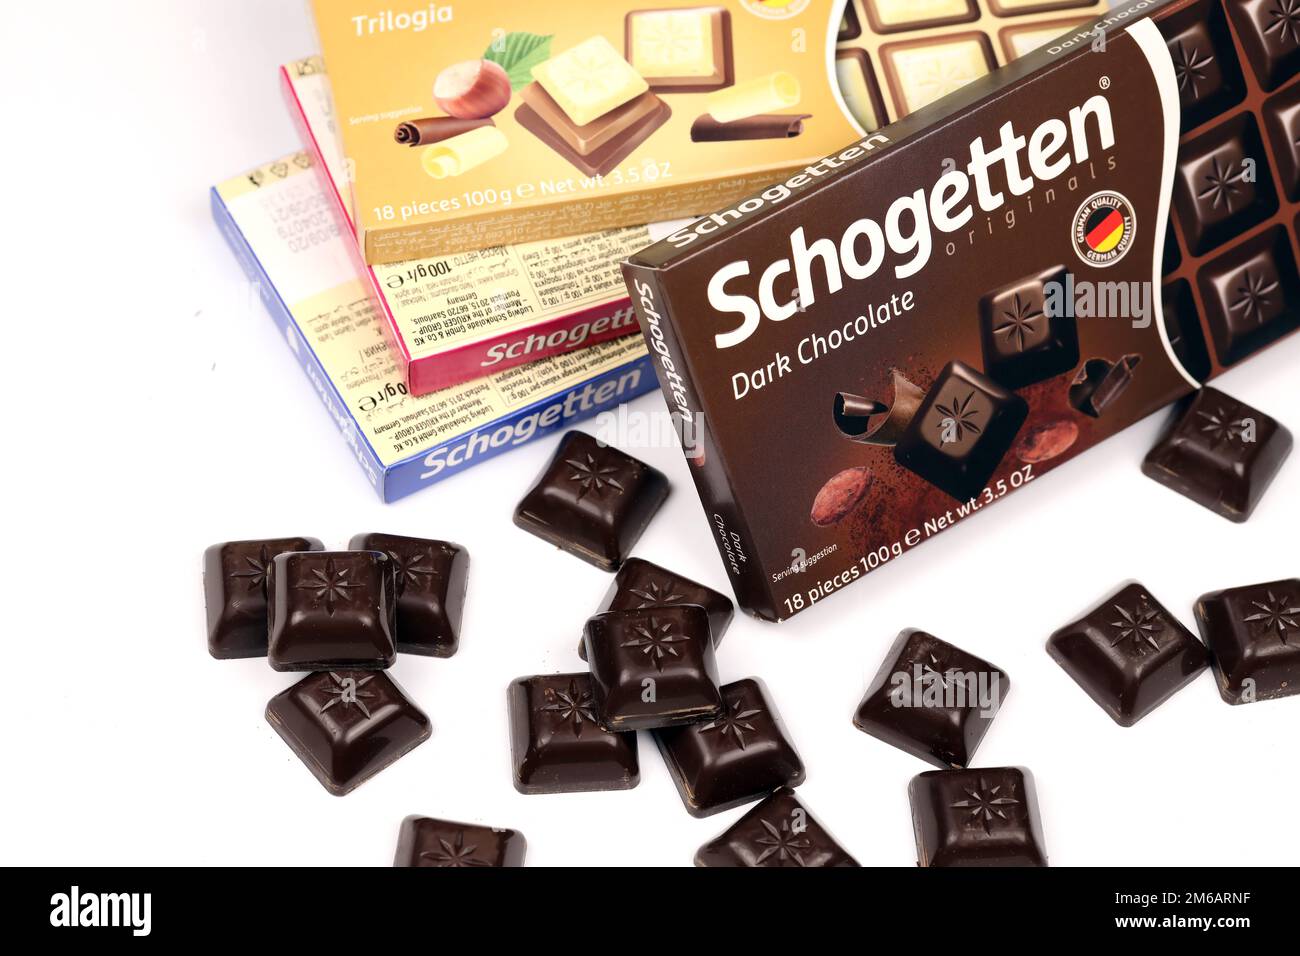 of Alamy GmbH - KG Photo Ludwig UKRAINE 2022 Stock Schogetten and successful confectionery KYIV, suppliers - MAY 4, Europes Chocolate one Schokolade Co. chocolate. by goods produced most